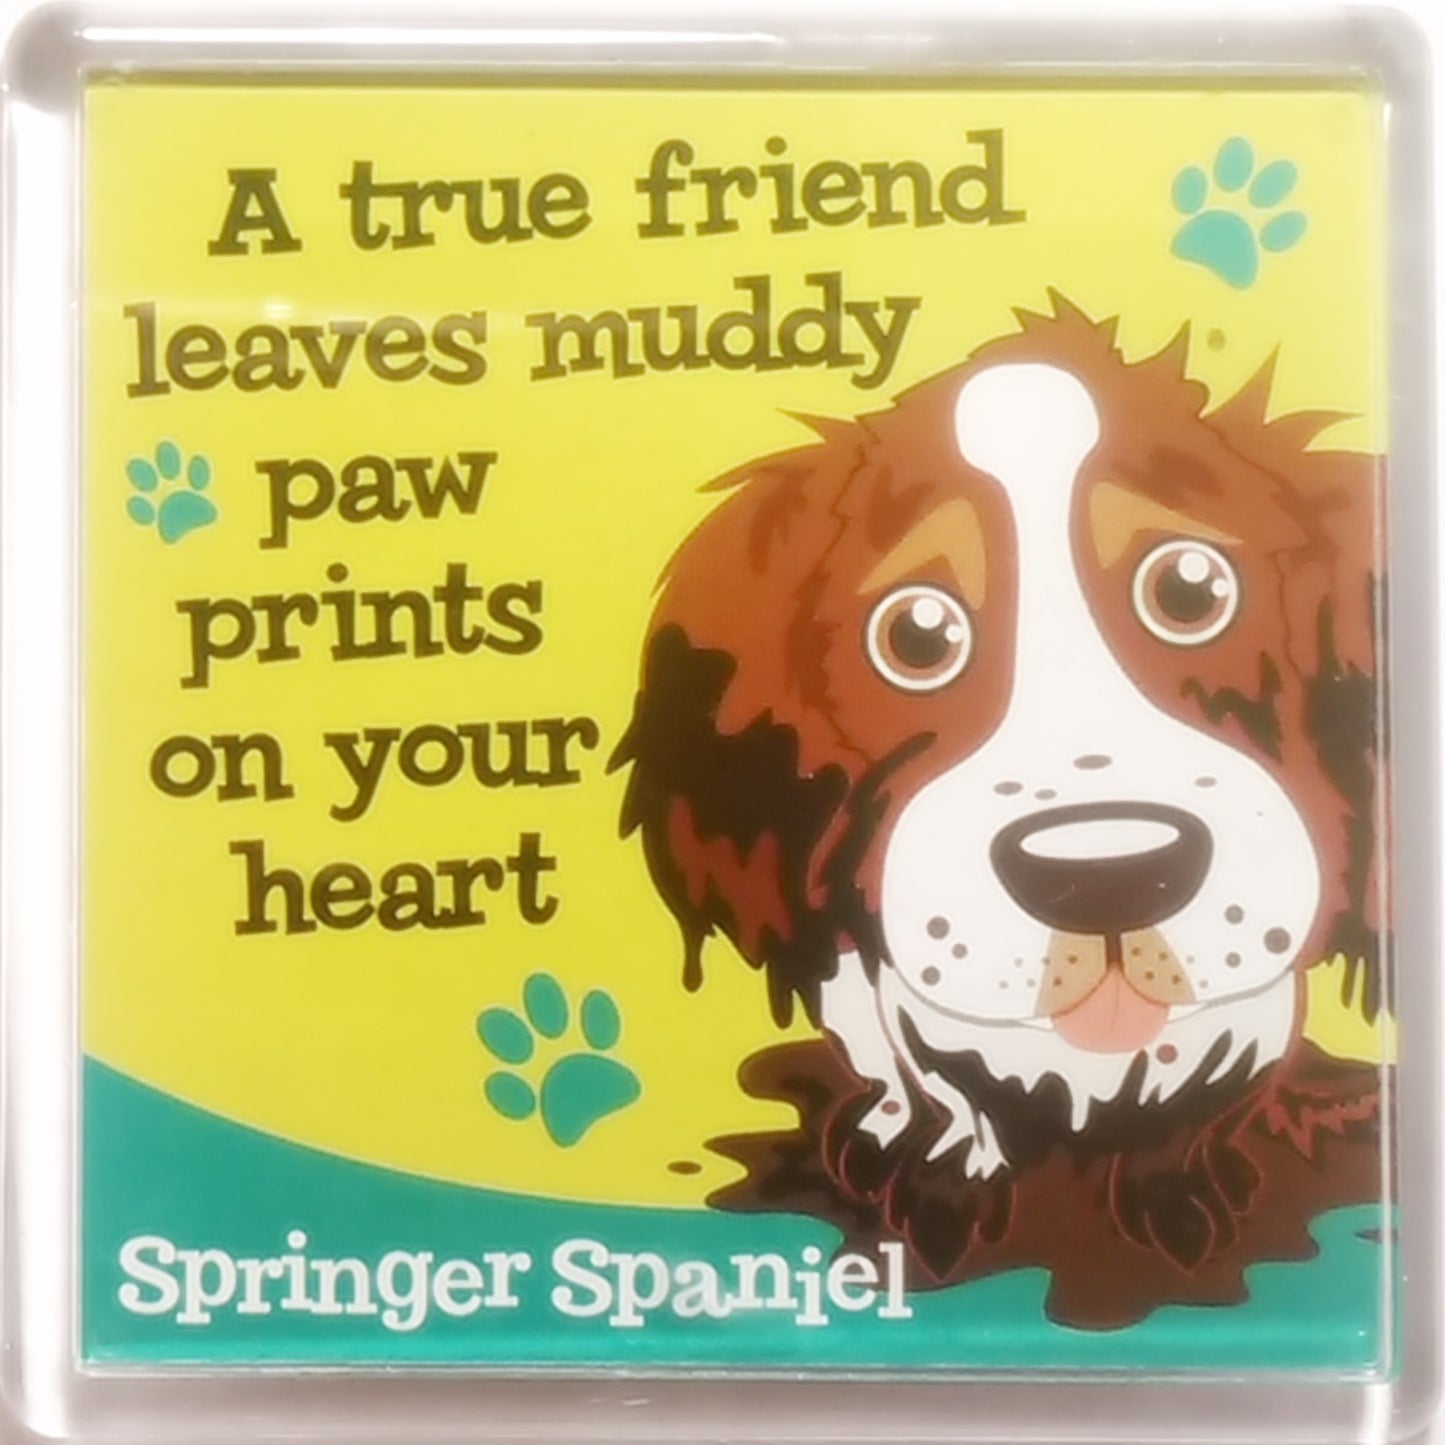 Wags & Whiskers Dog Magnet "Springer Spaniel (Brown & White)" by Paper Island